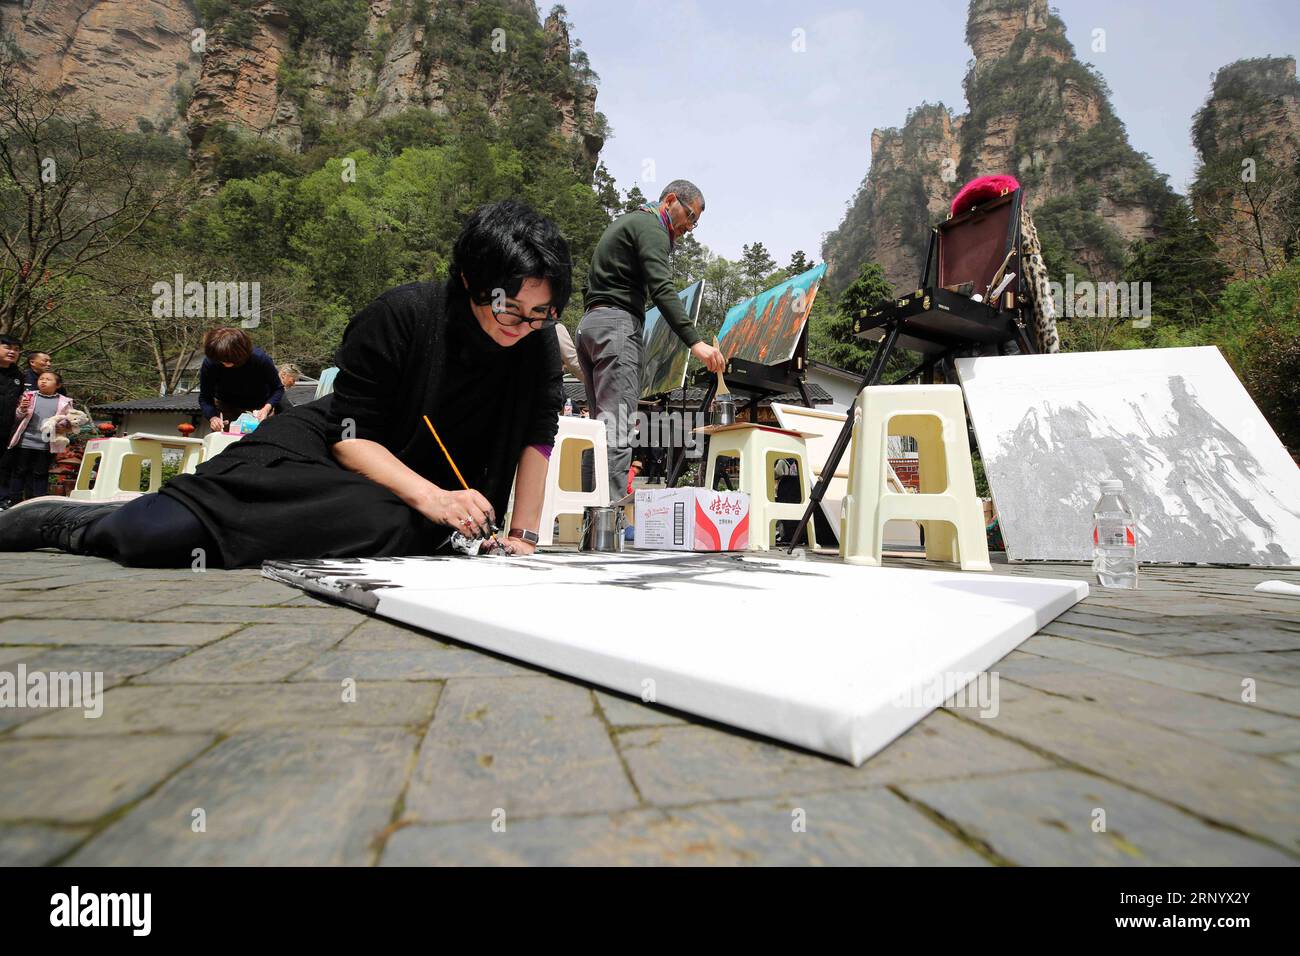 (180407) -- ZHANGJIAJIE, April 7, 2018 -- Giovanna Fezzi (L) from Italy paints at Zhangjiajie UNESCO Global Geopark at Wulingyuan District of Zhangjiajie City, central China s Hunan Province, April 6, 2018. About 21 artists coming from Italy took part in a cultural event at the geopark which is known for its quartzose sandstone landform. This geopark is one of the geoparks in China that have already been chosen by UNESCO on its World Network of Geoparks. )(wsw) CHINA-HUNAN-ZHANGJIAJIE GEOPARK-ITALIAN ARTISTS (CN*) WuxYongbing PUBLICATIONxNOTxINxCHN Stock Photo